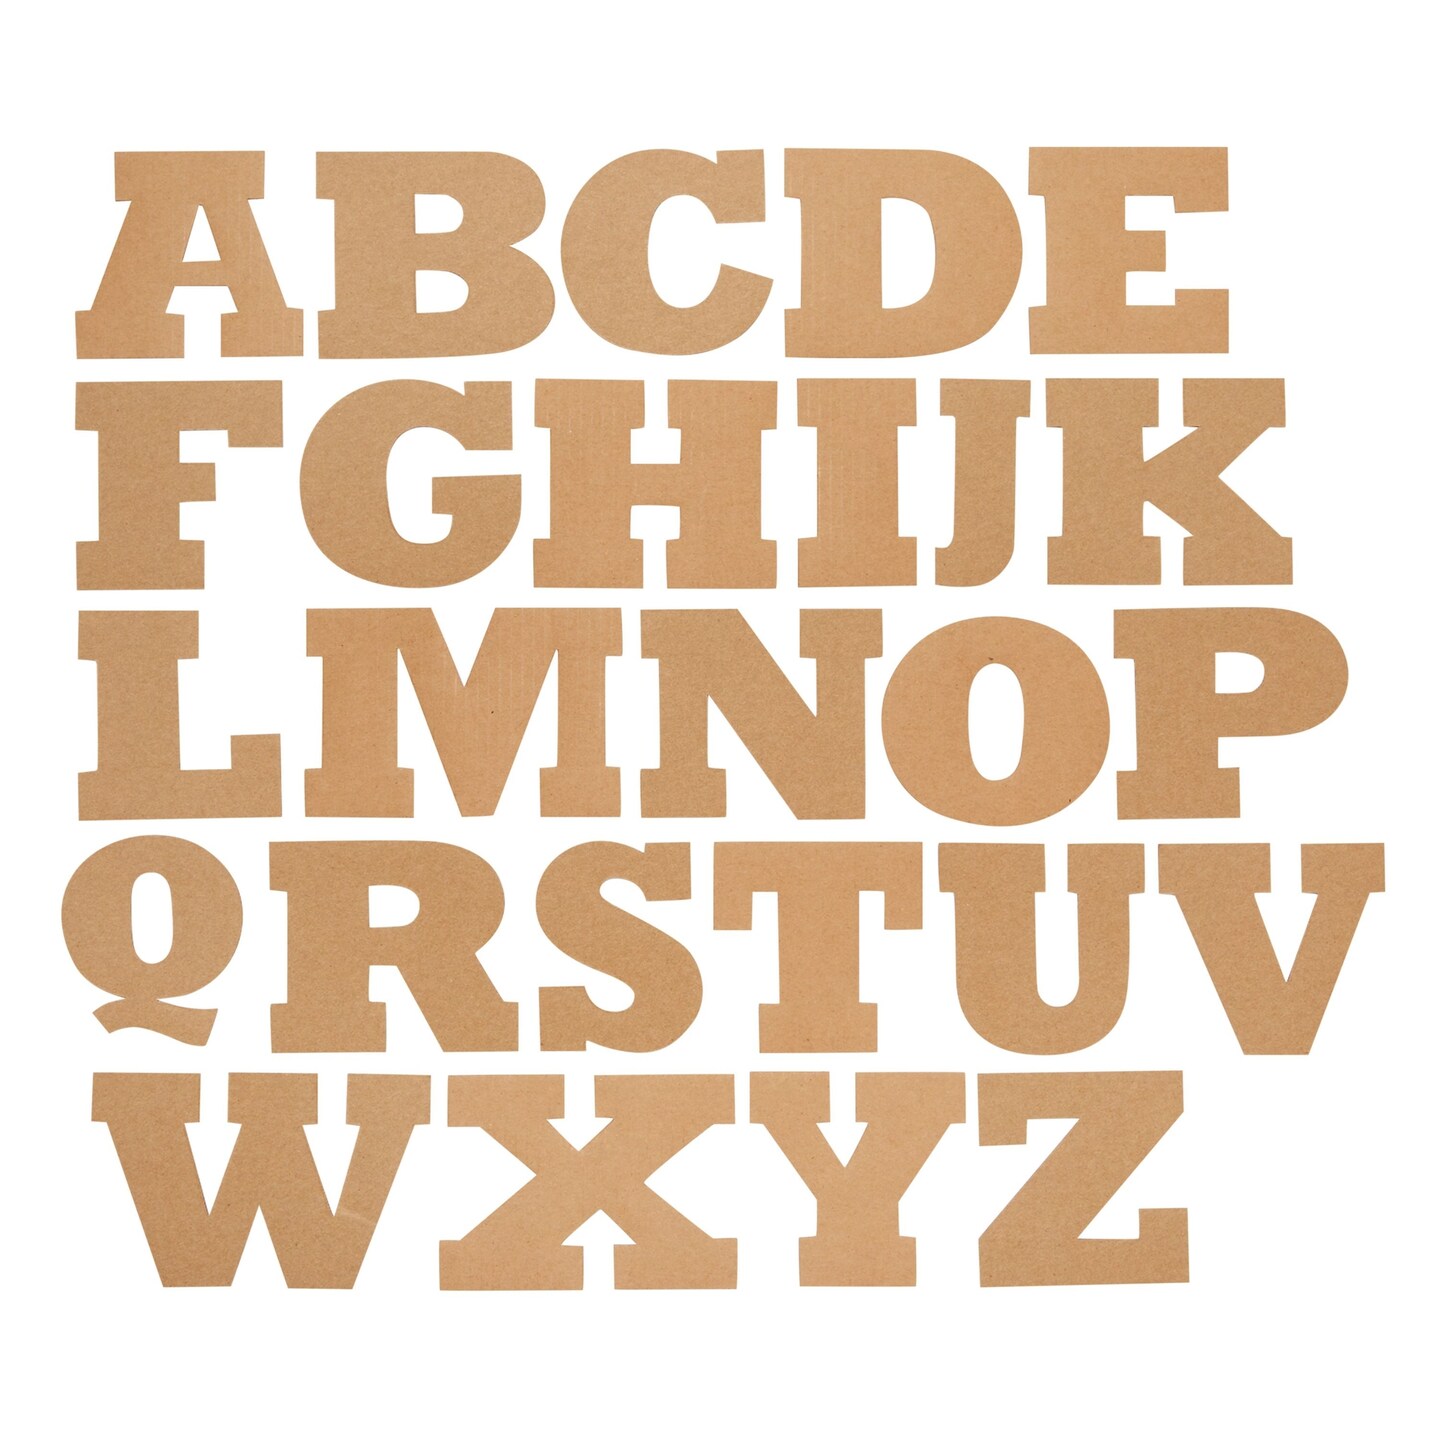 104 Piece Unfinished Cardboard Alphabet Letters for DIY Crafts, Classrooms Projects (3x3 In)